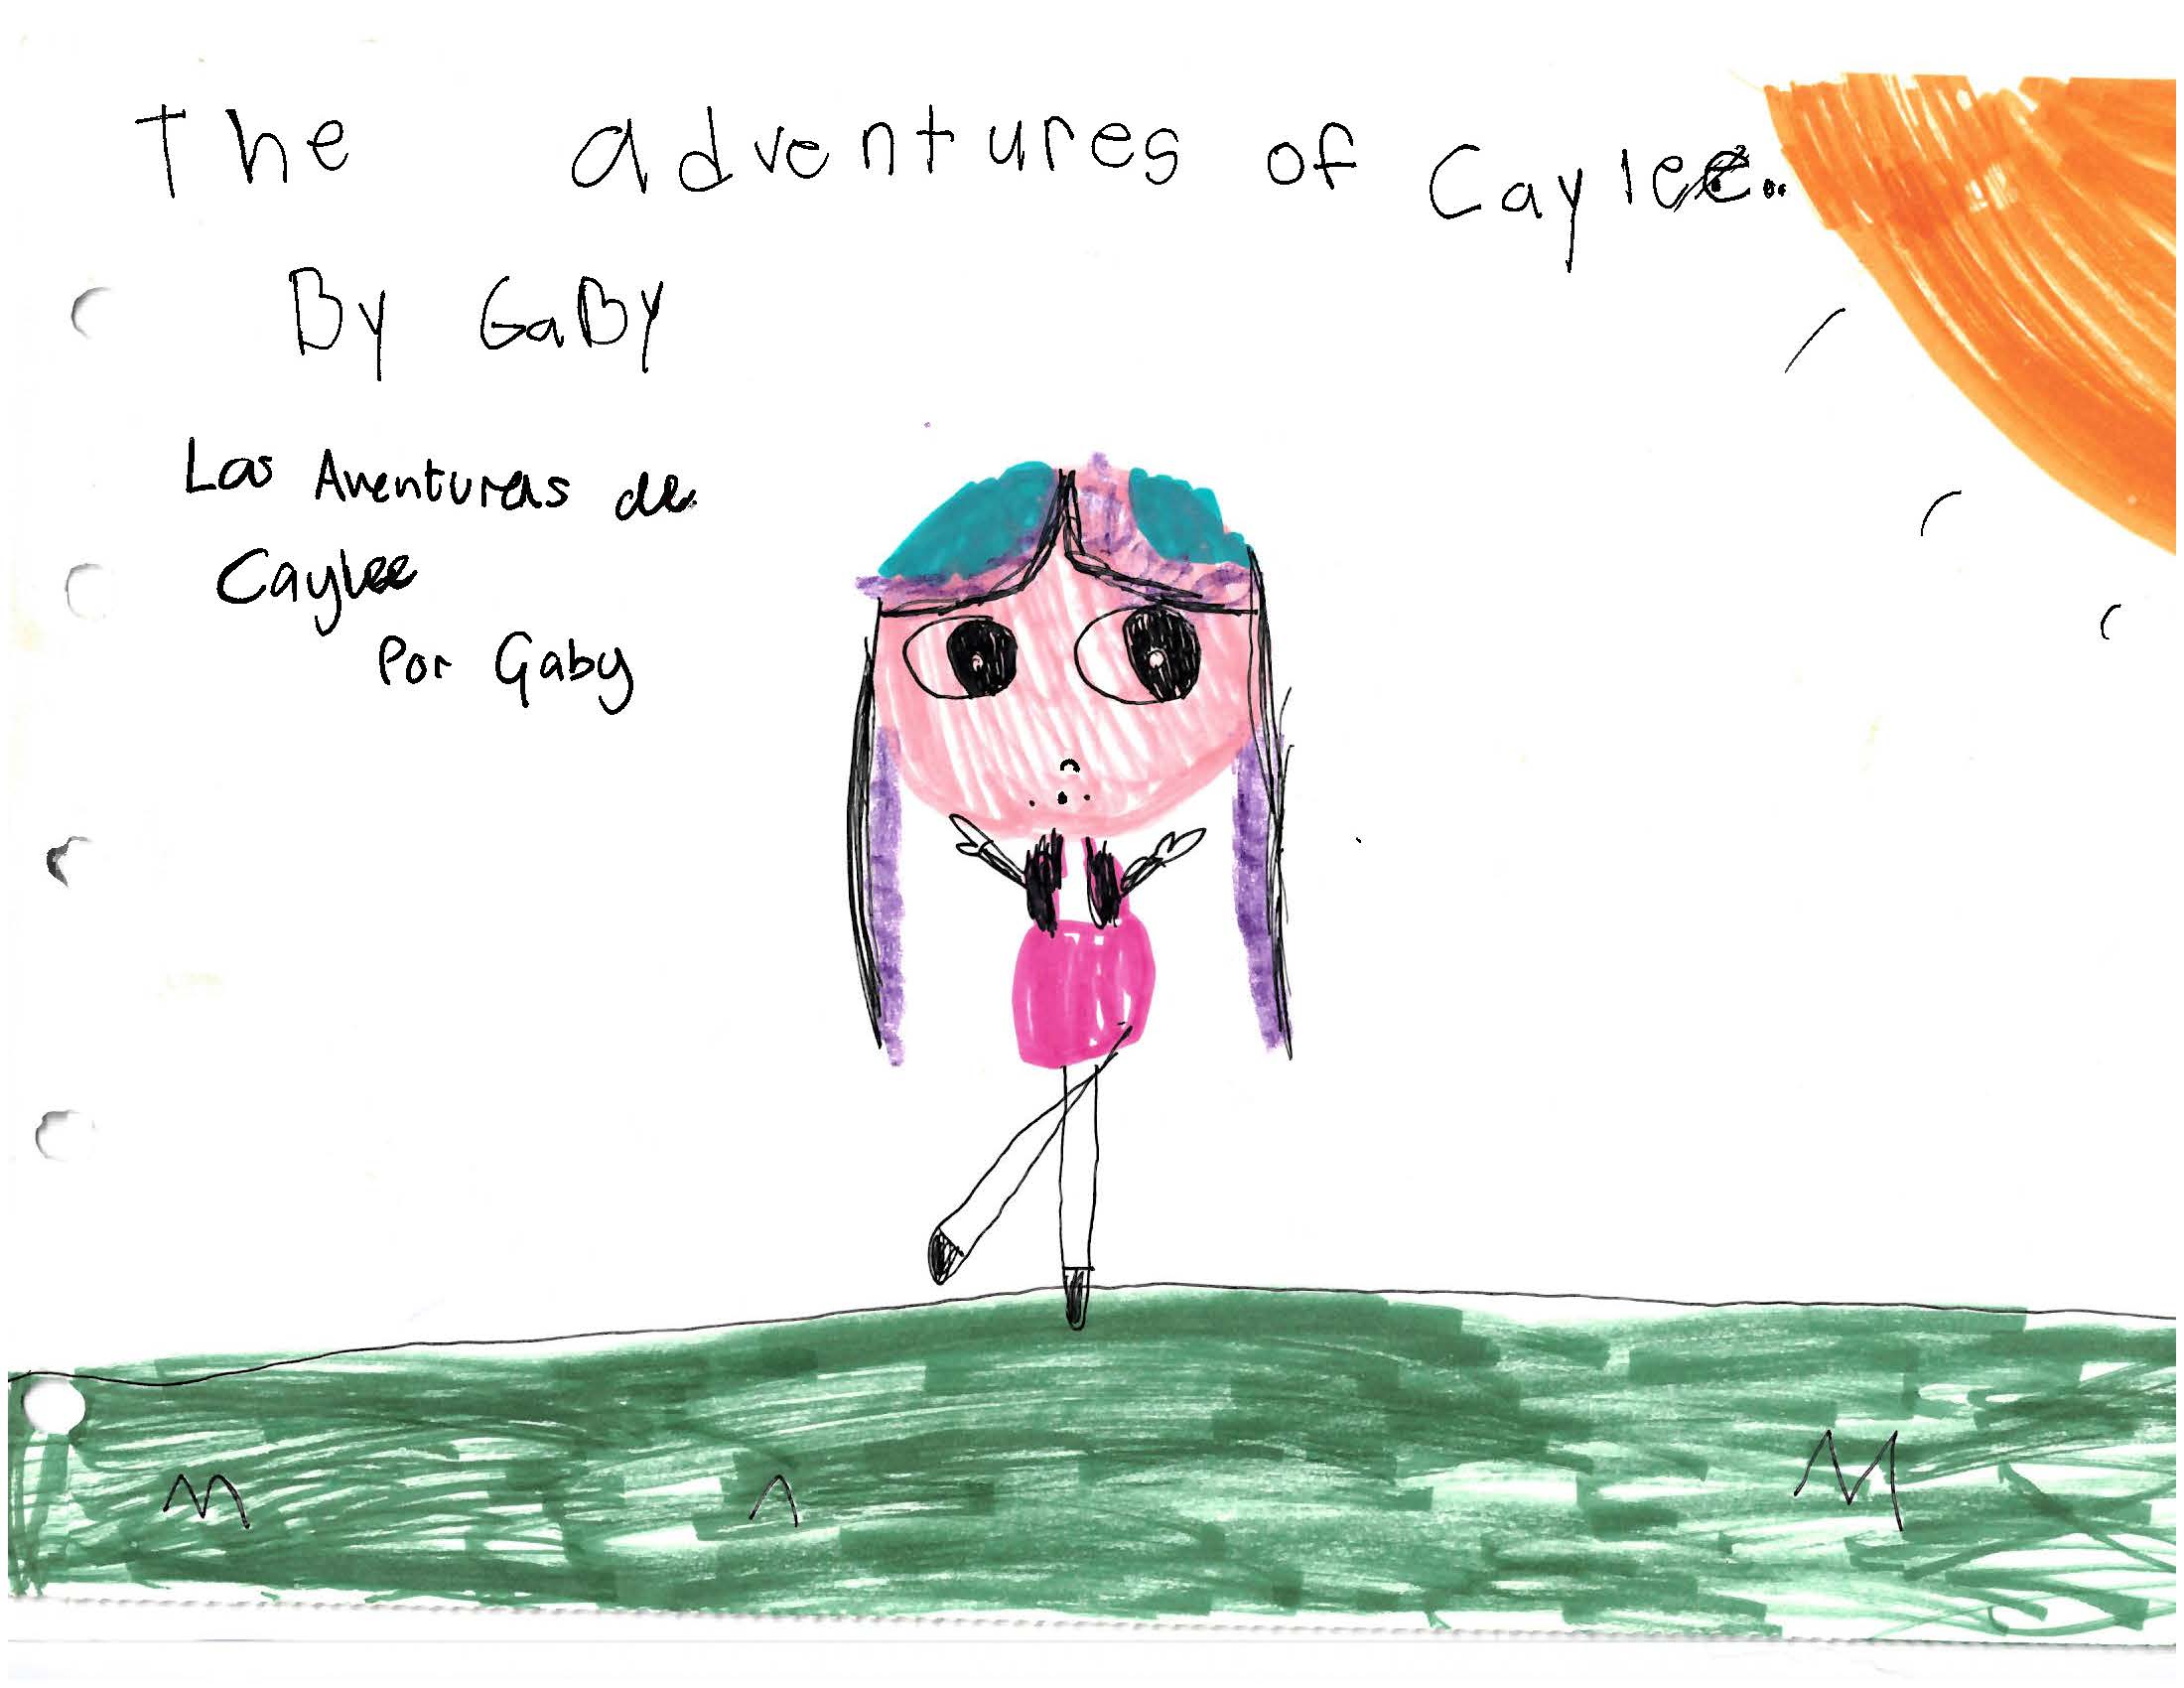 The Adventures of Caylee by Gaby L